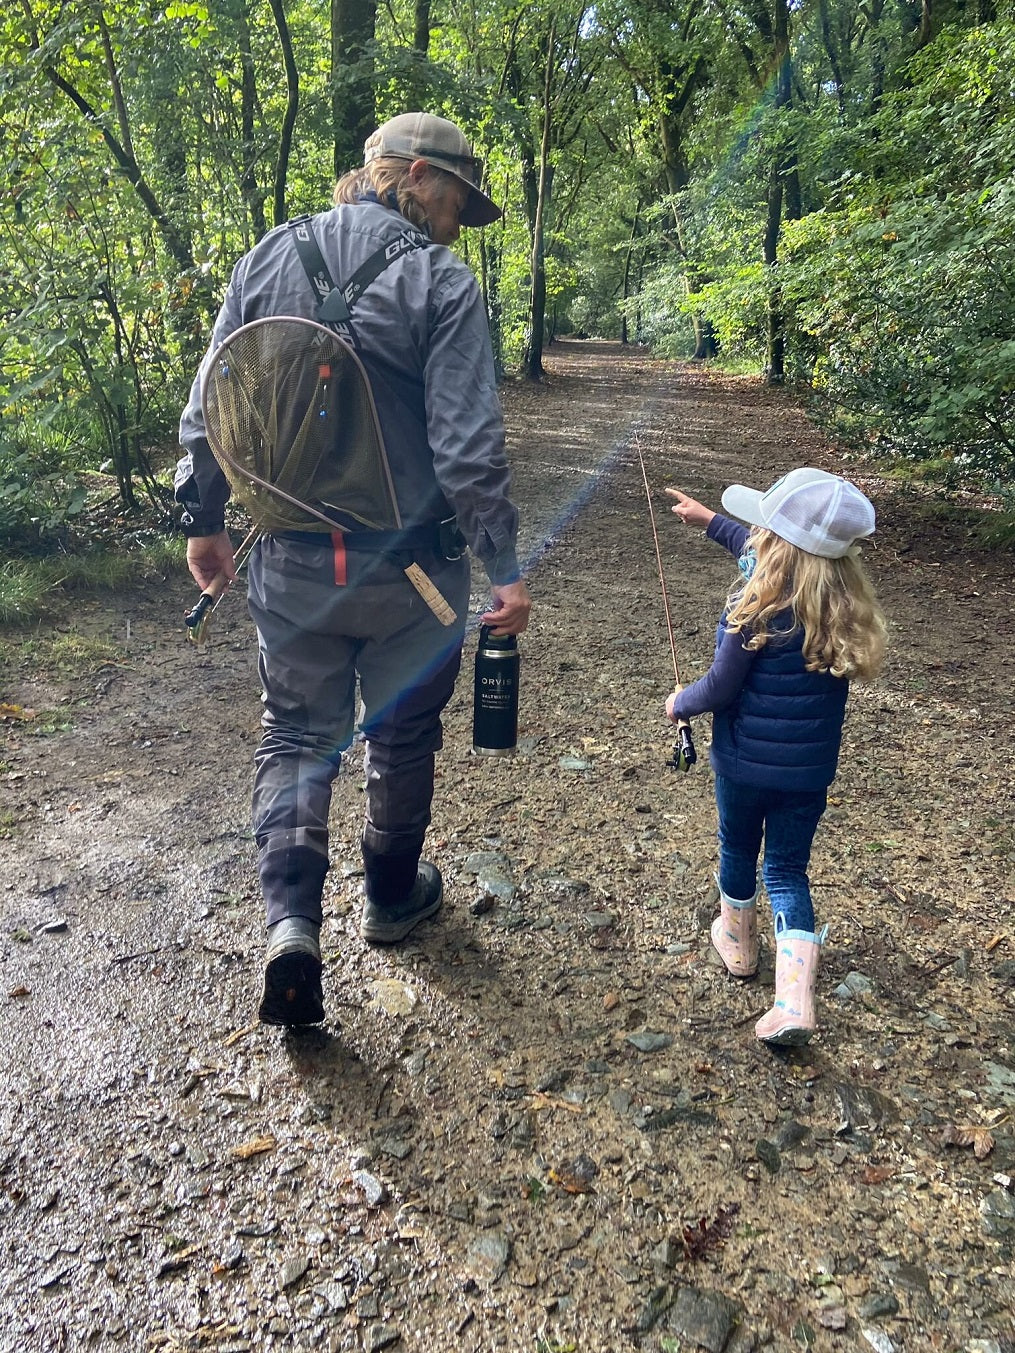 Malcolm Sargeant and his Daughter - introducing fly fishing to the next generation. 